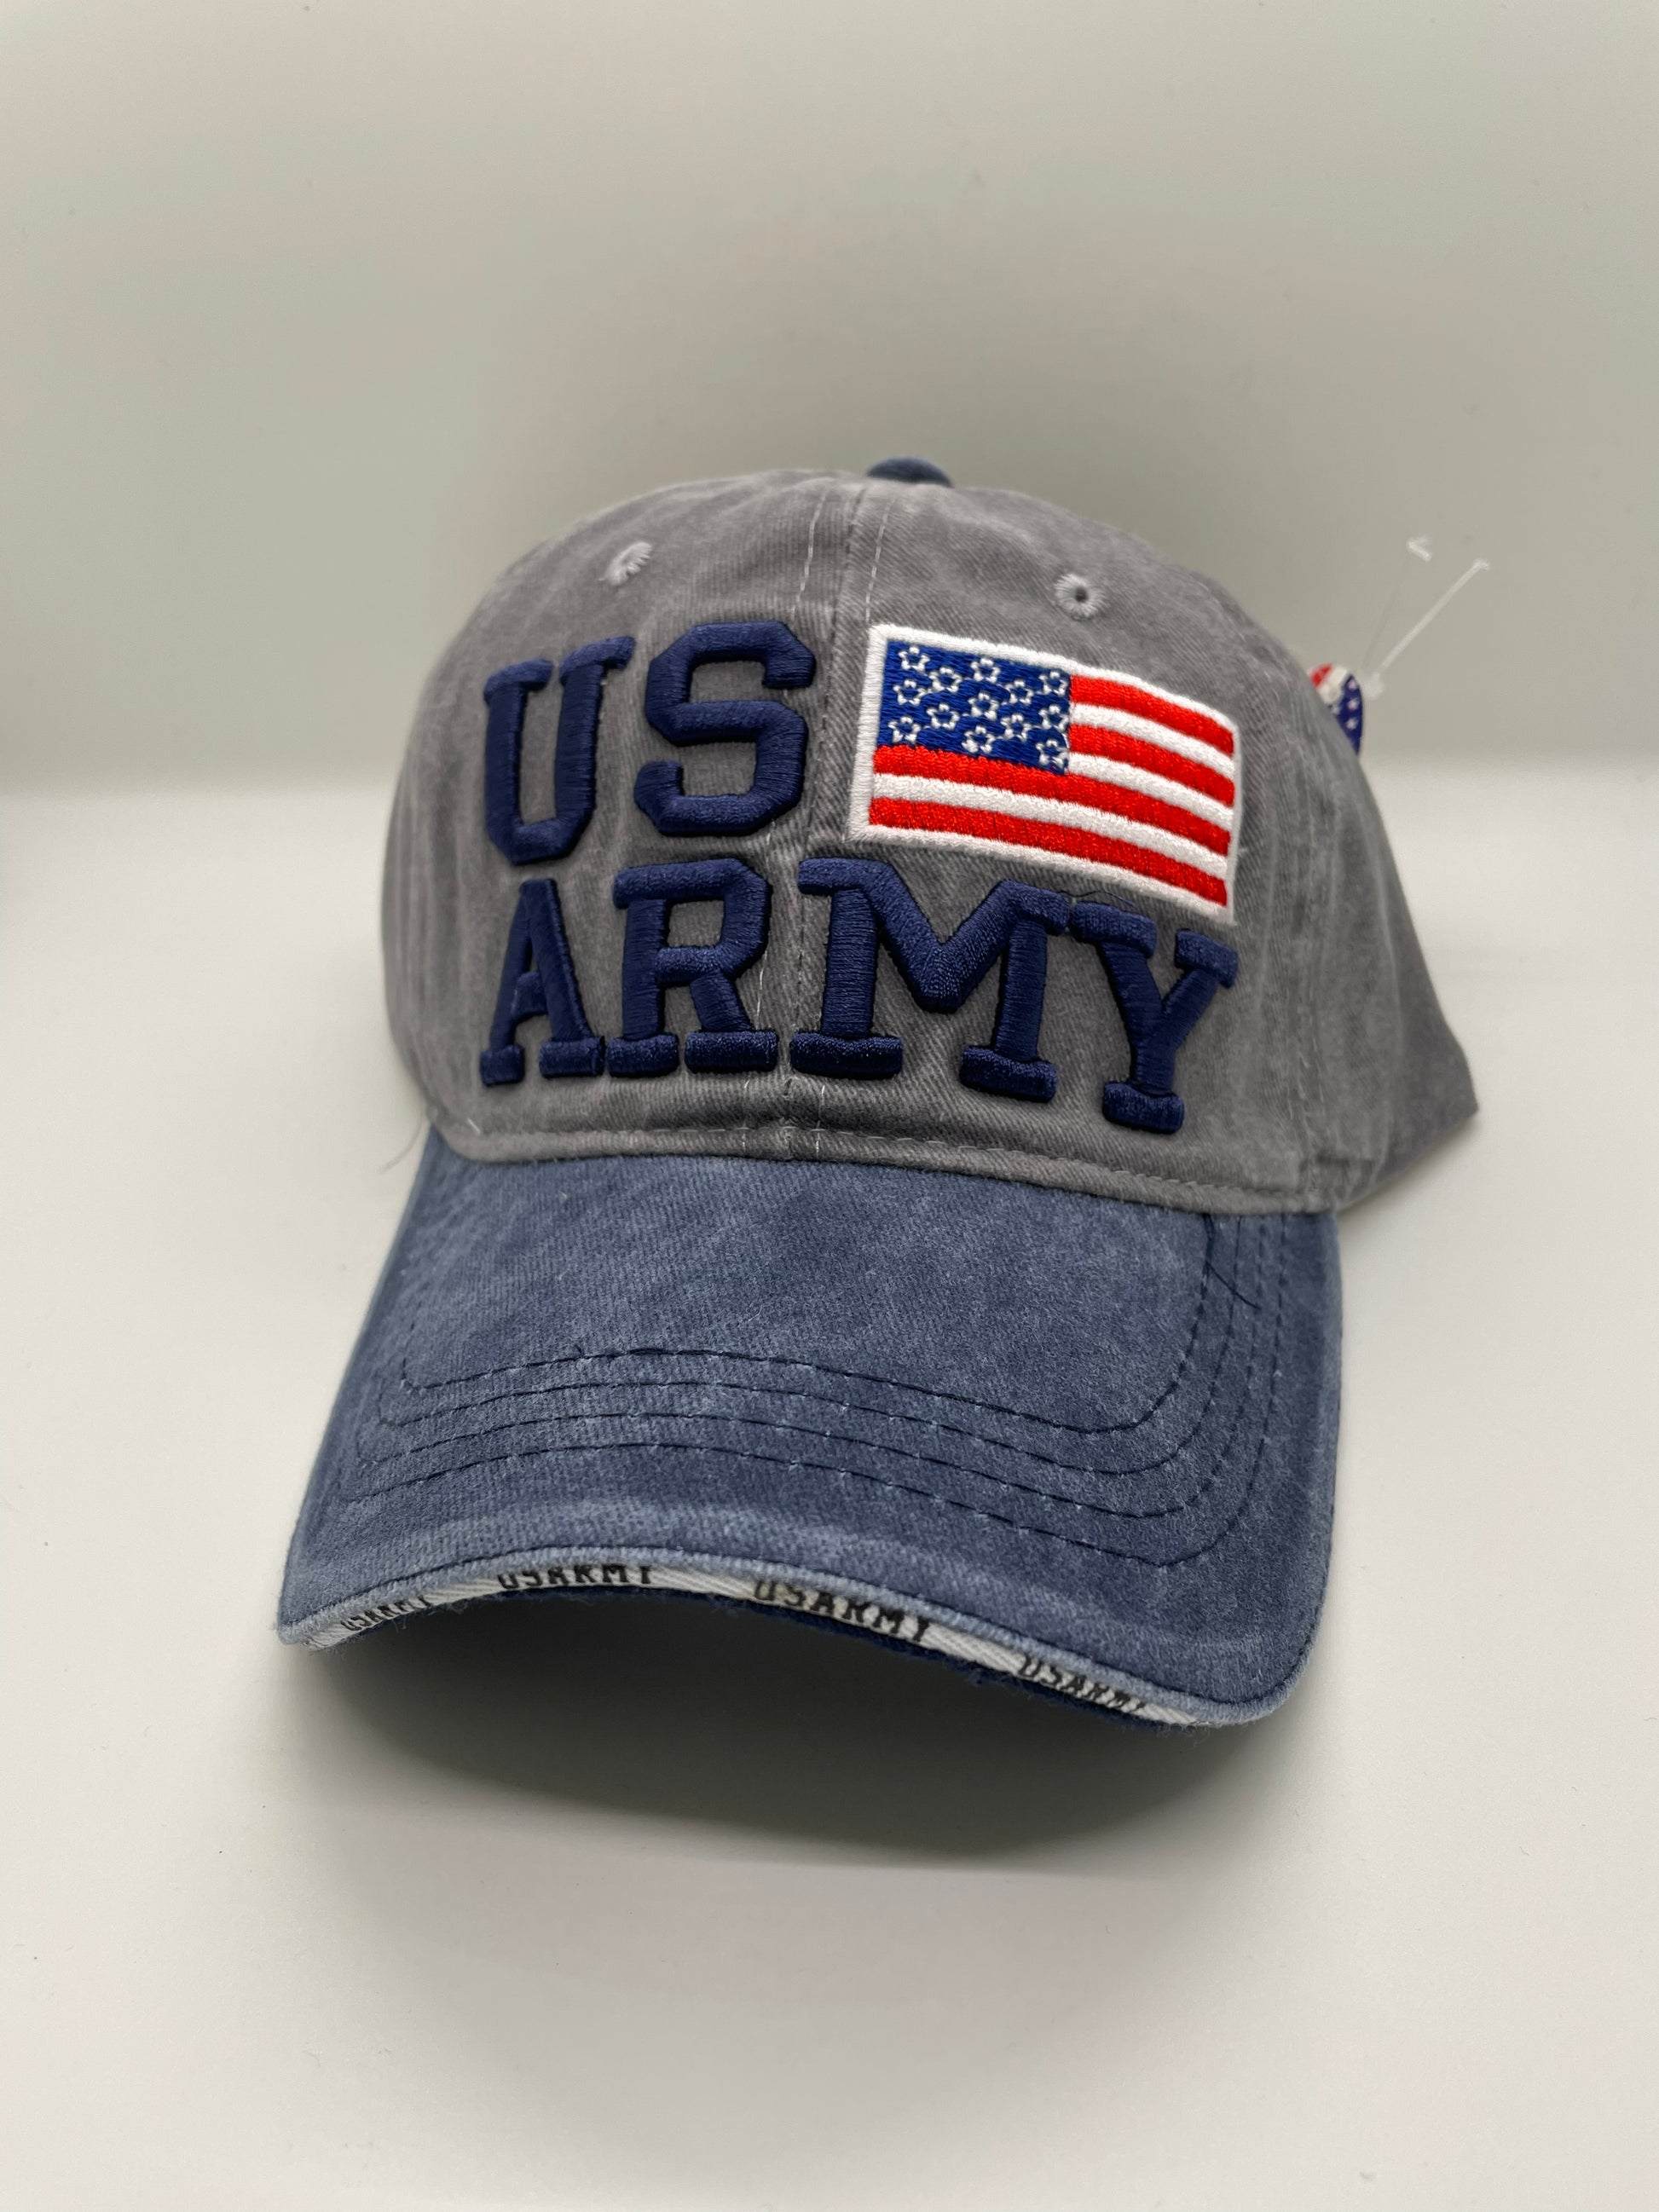 "Red US Army hat with a padded headband and a stretchy fit"